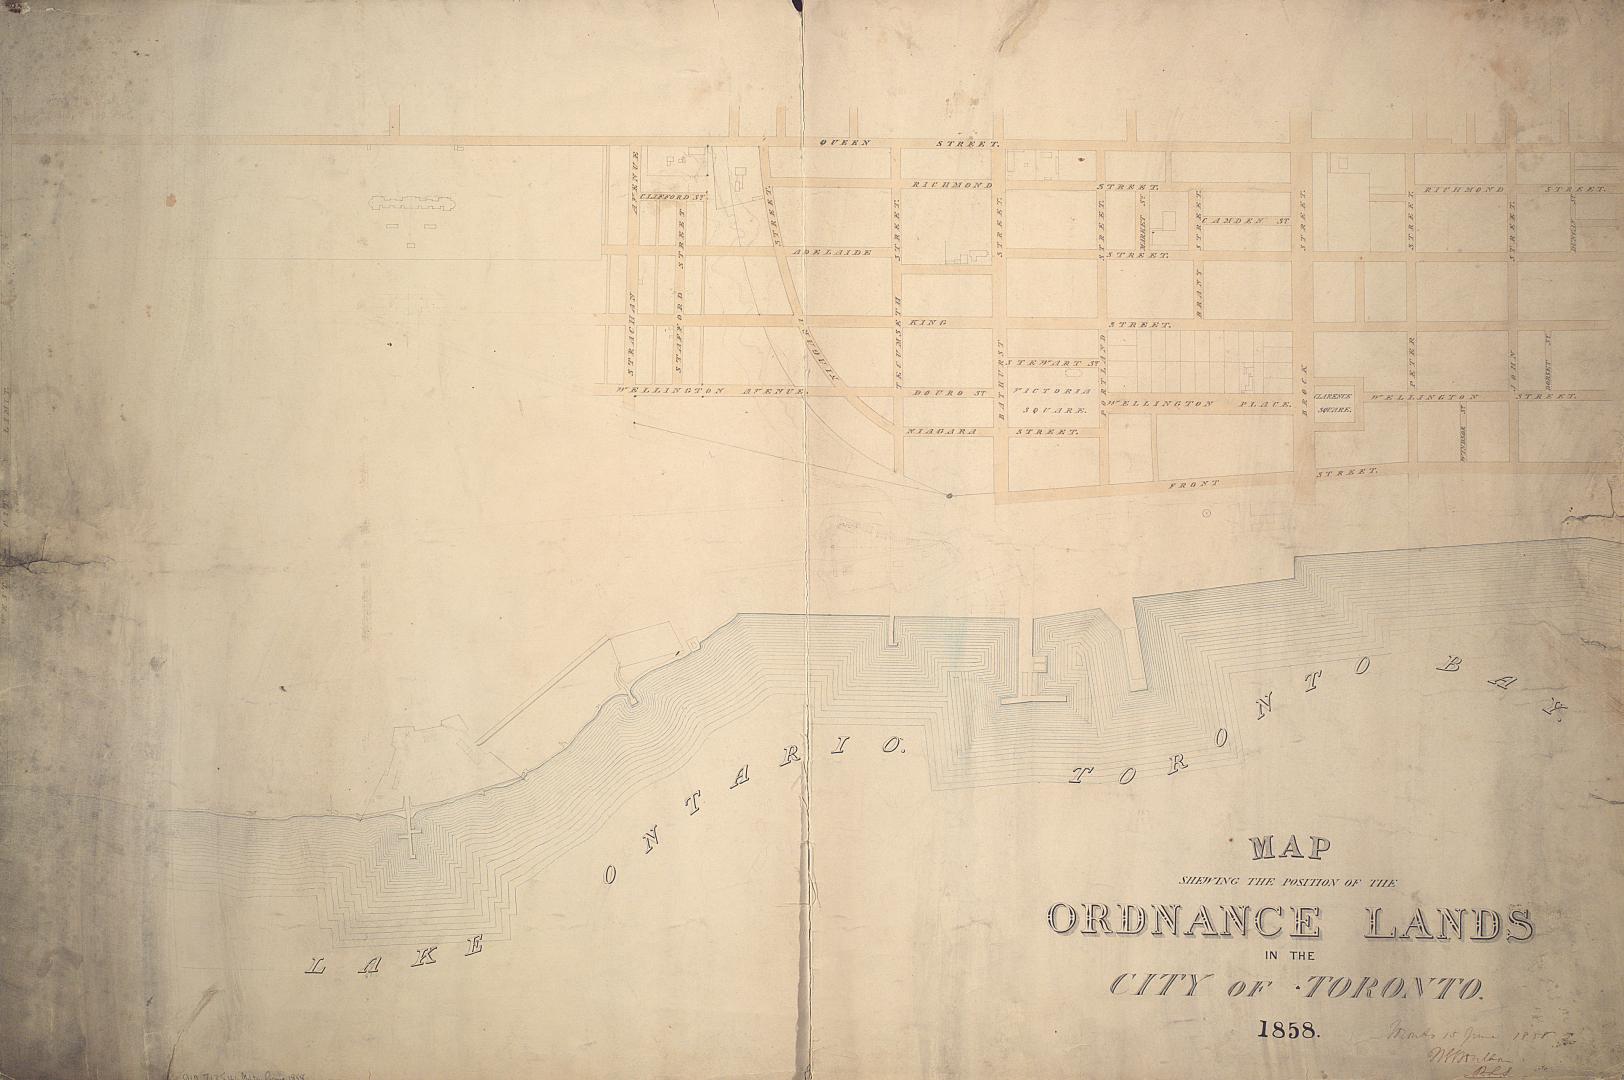 Map shewing the position of the ordnance lands in the City of Toronto.